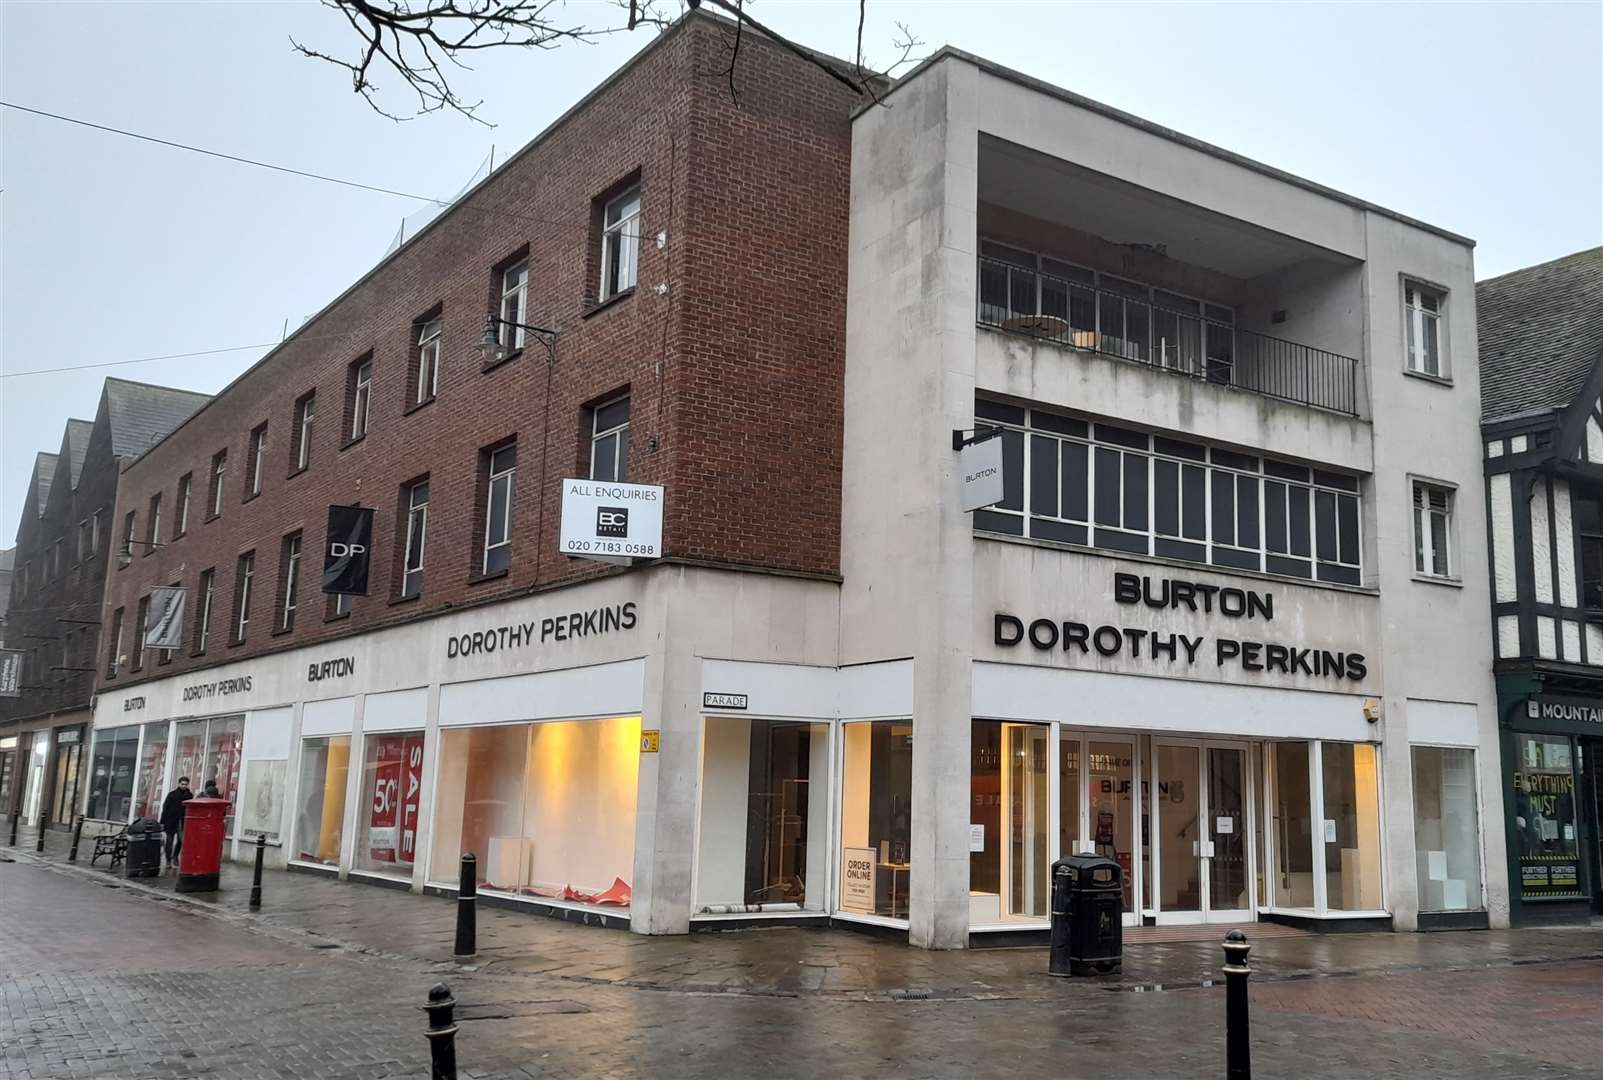 The former Burton and Dorothy Perkins premises is now on the market